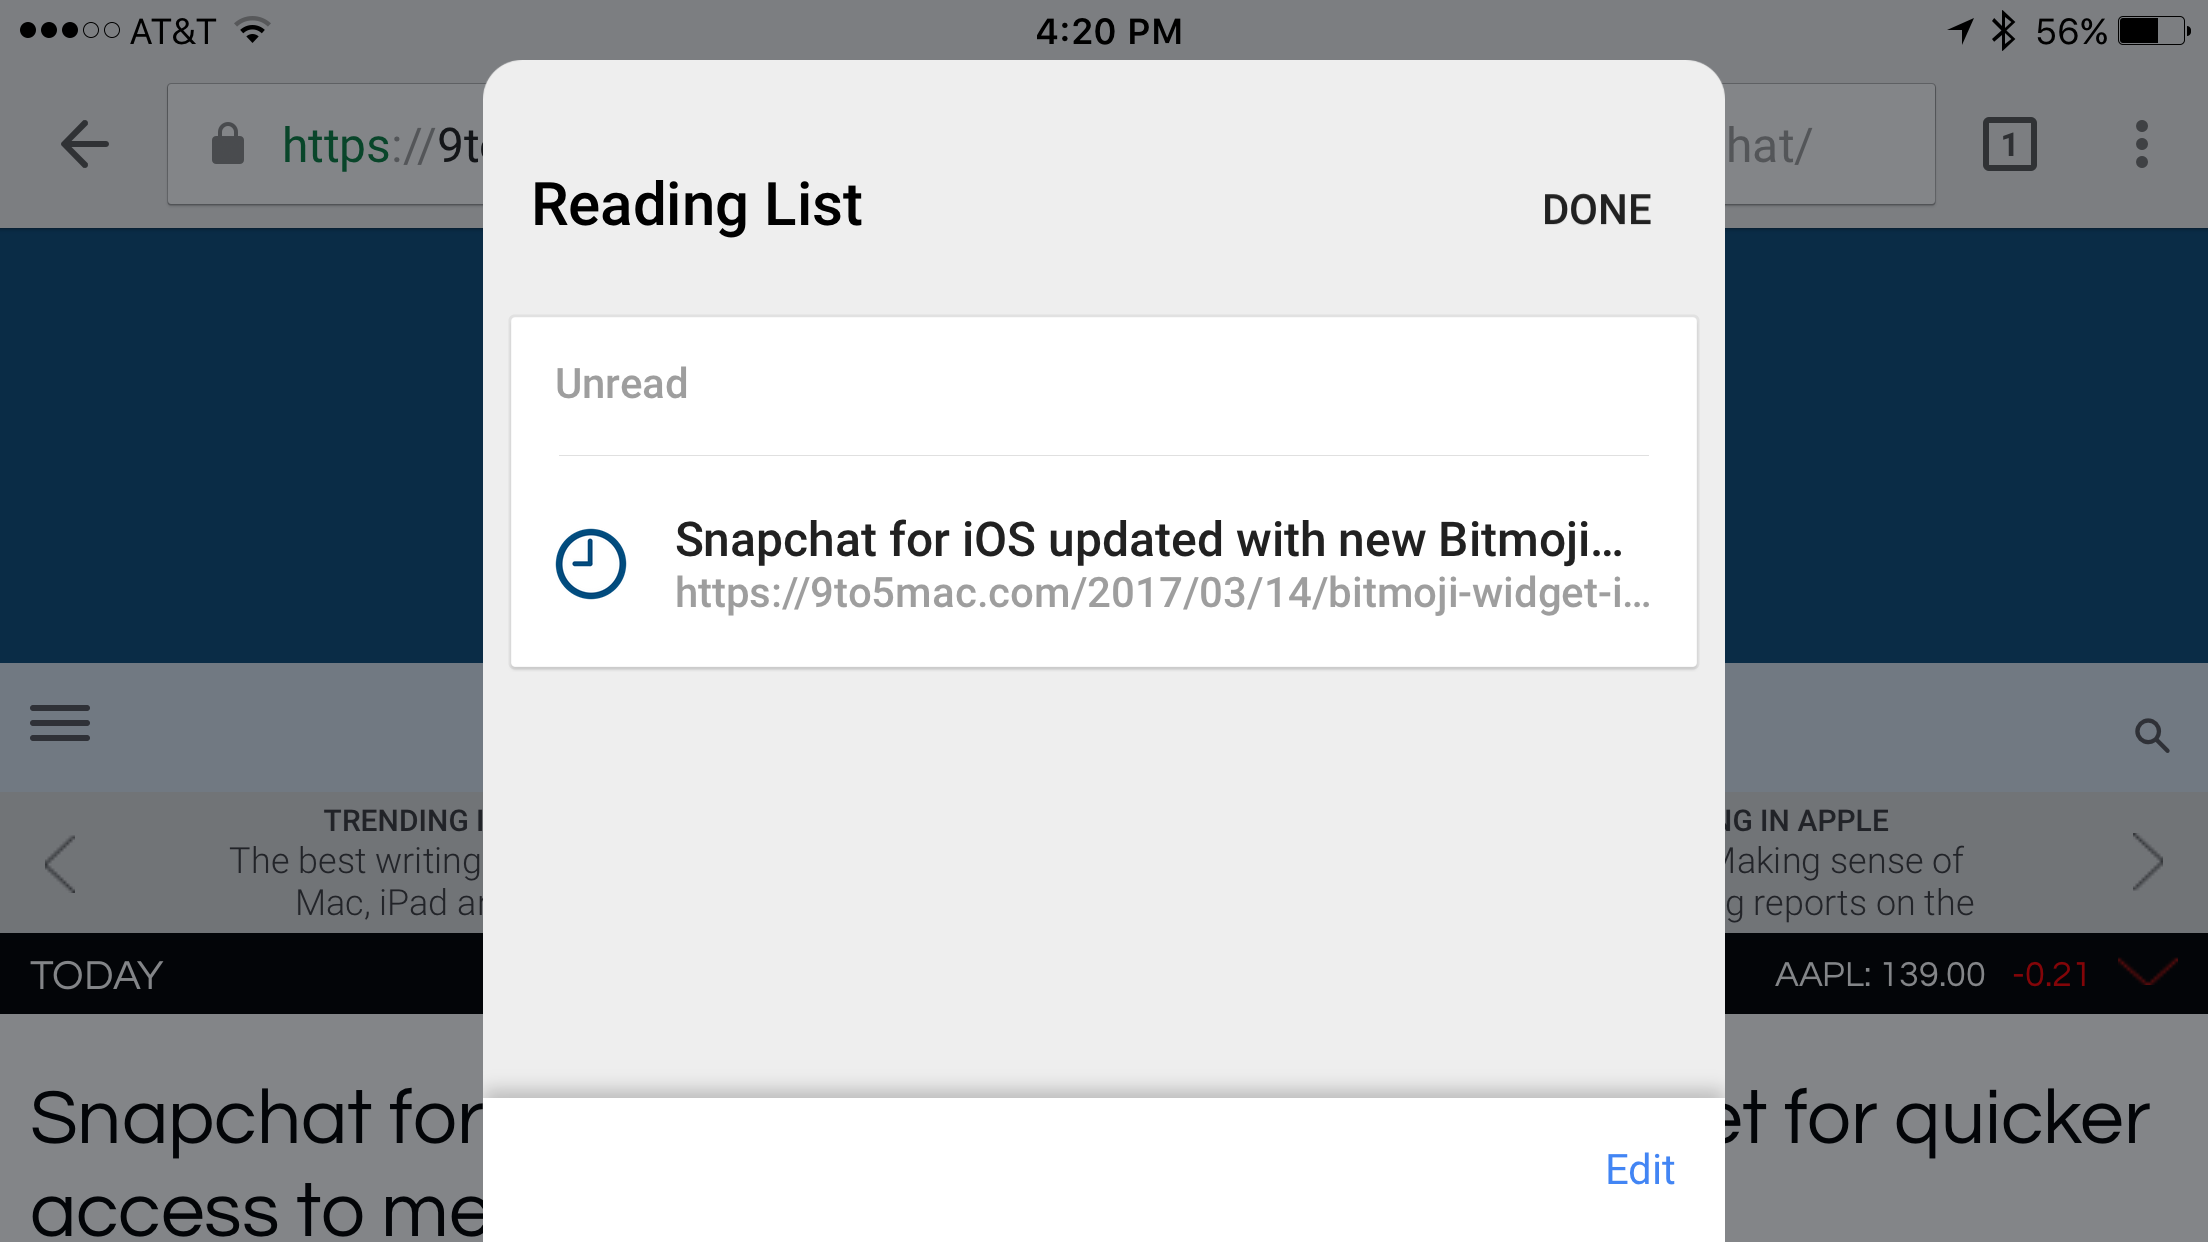 chrome for mac doesn’t actually support the new reading list at all)